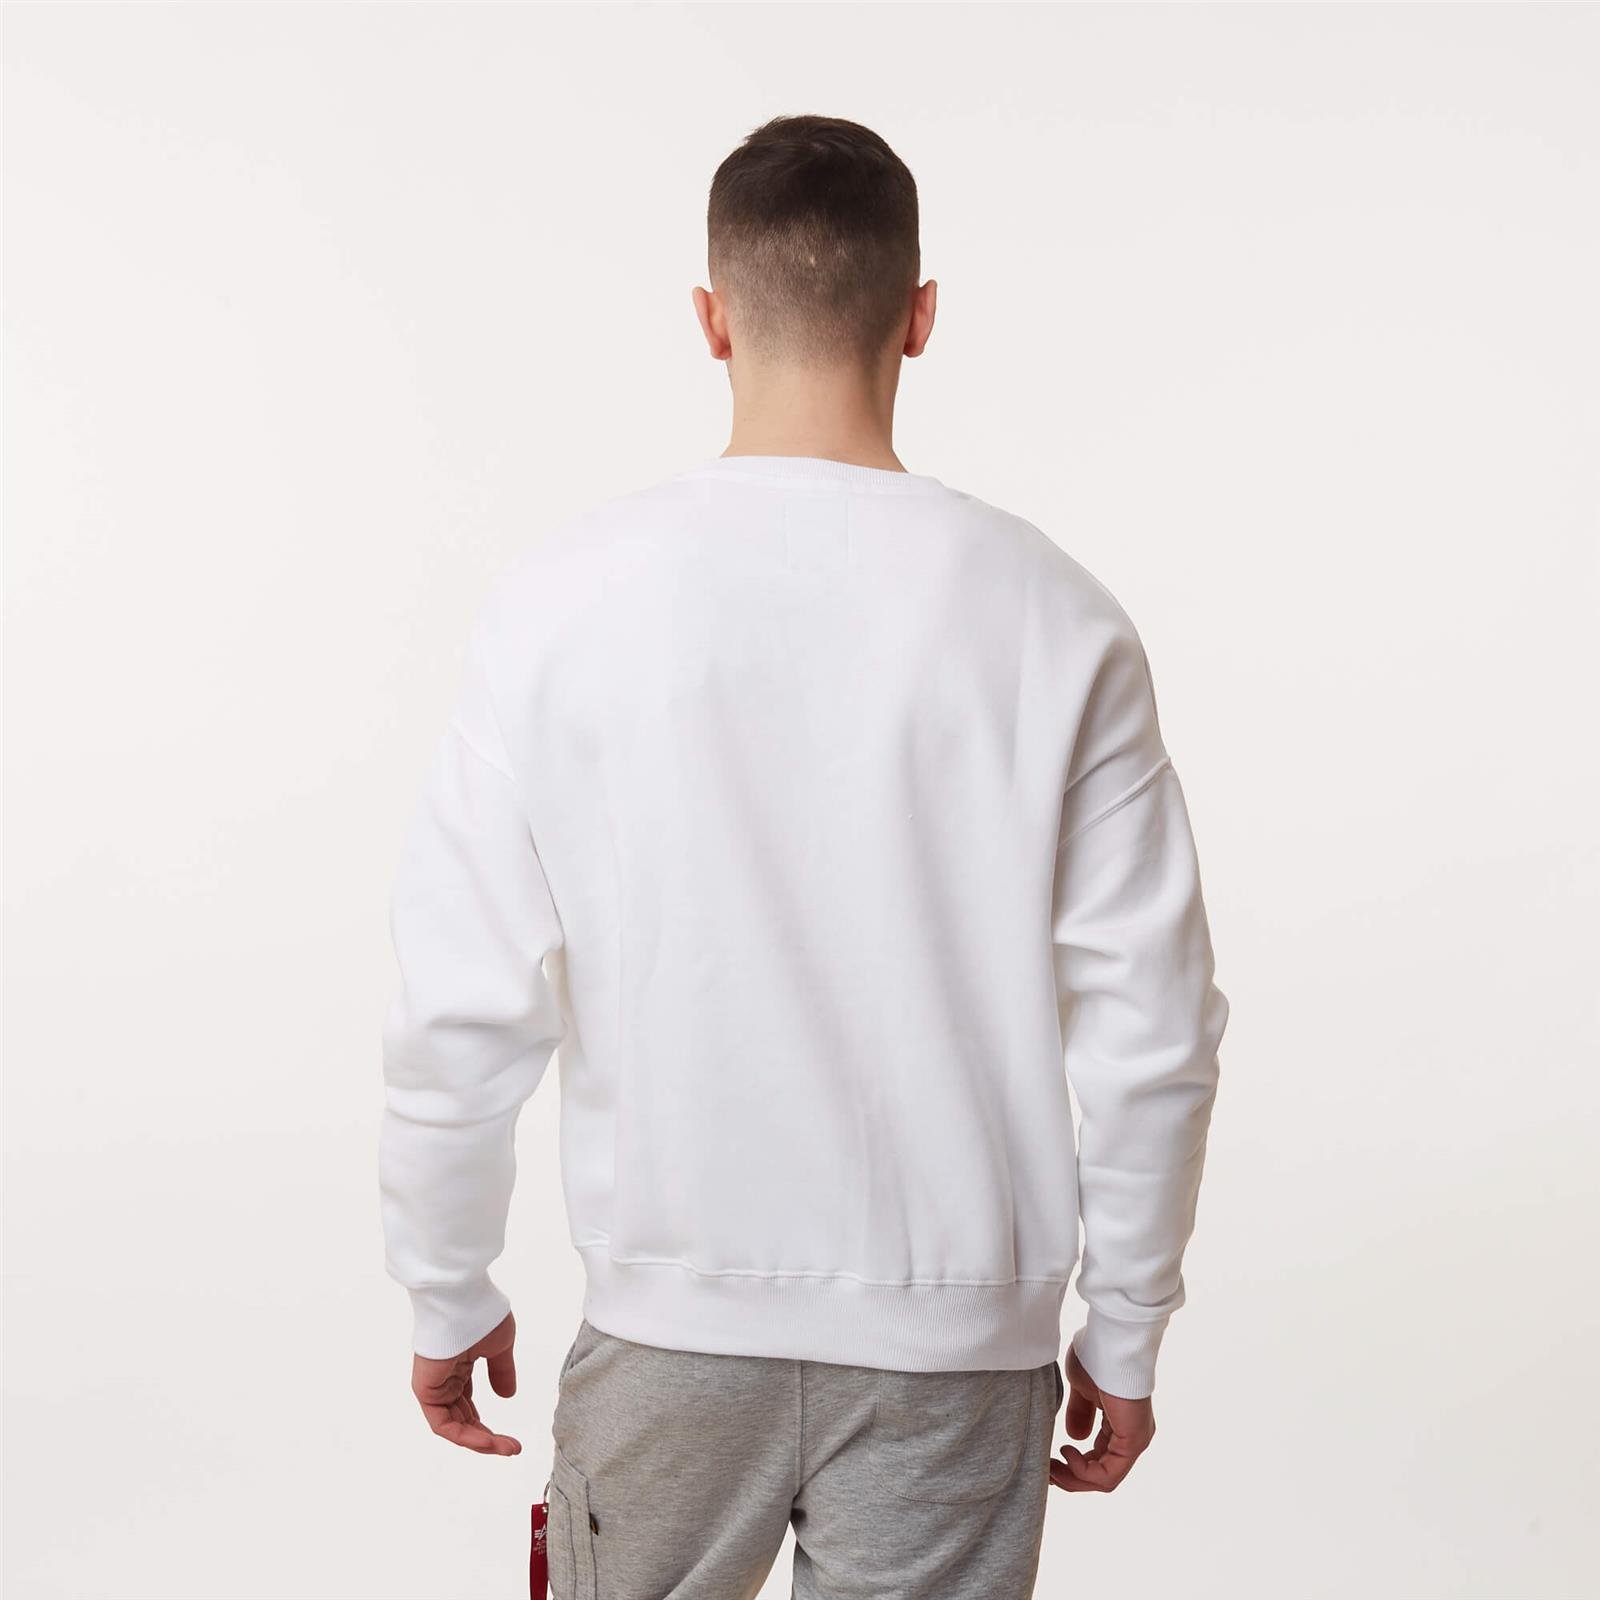 Alpha Industries BASIC OS SWEATER Industries clothing \\ \\ #Recommended Men Brands \\ Ellesse | Sweatshirts brands Alpha \\ Men\'s \\ #Brands Men WHITE clothing \\